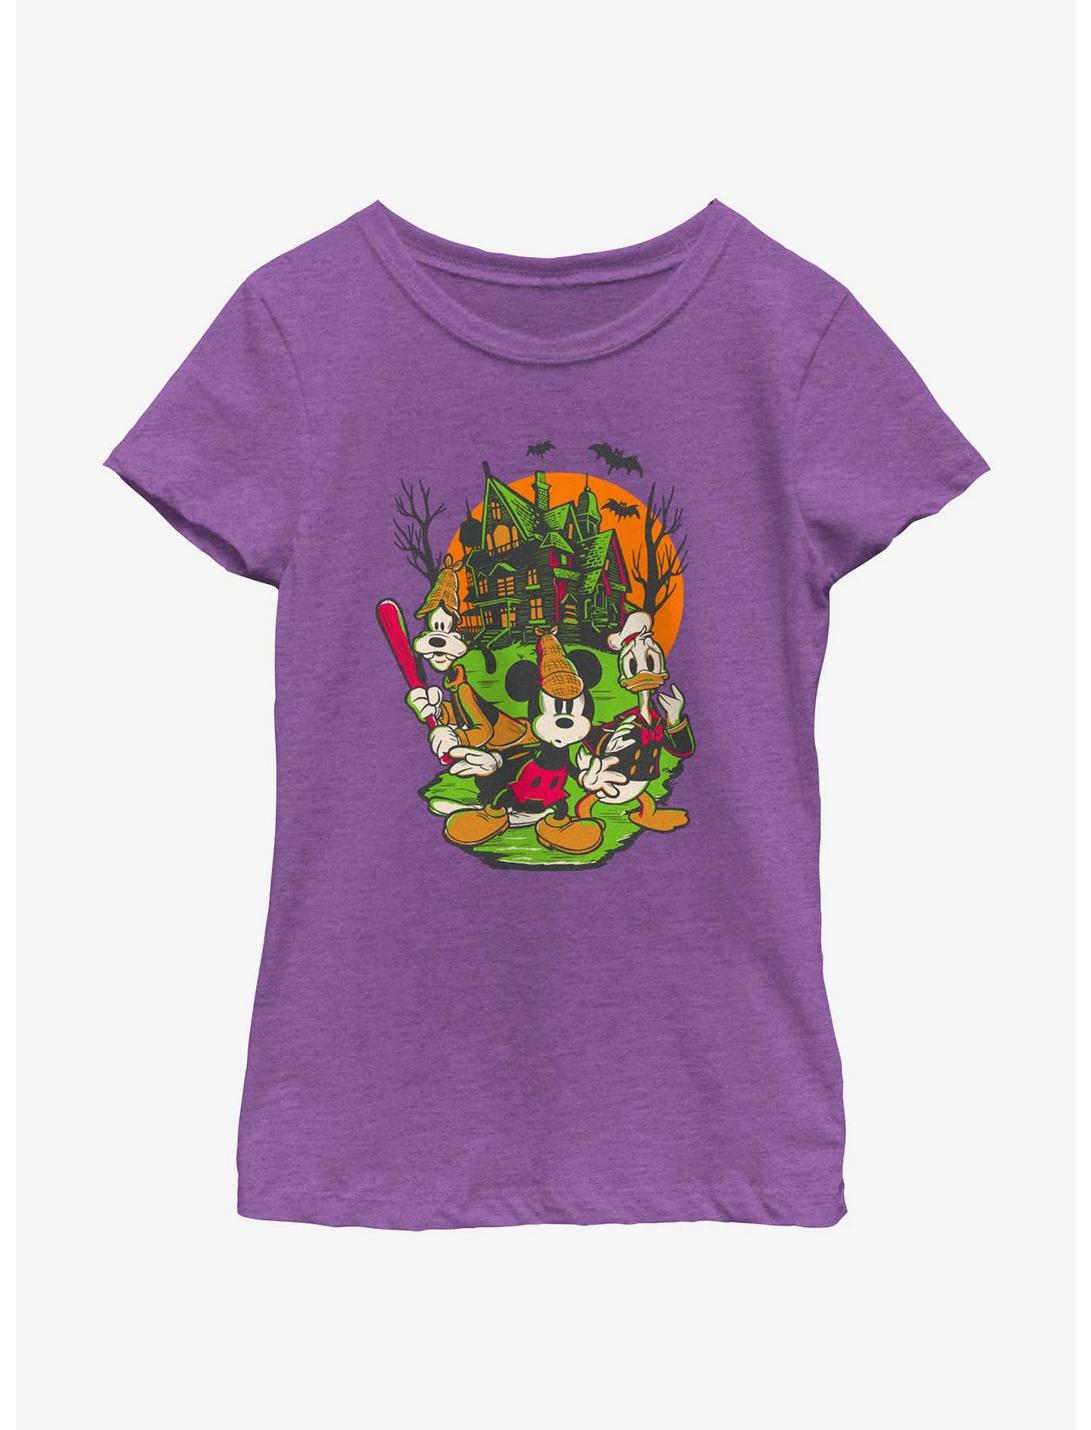 Disney100 Halloween Mickey Goofy and Donald Haunted House Youth Girl's T-Shirt, PURPLE BERRY, hi-res